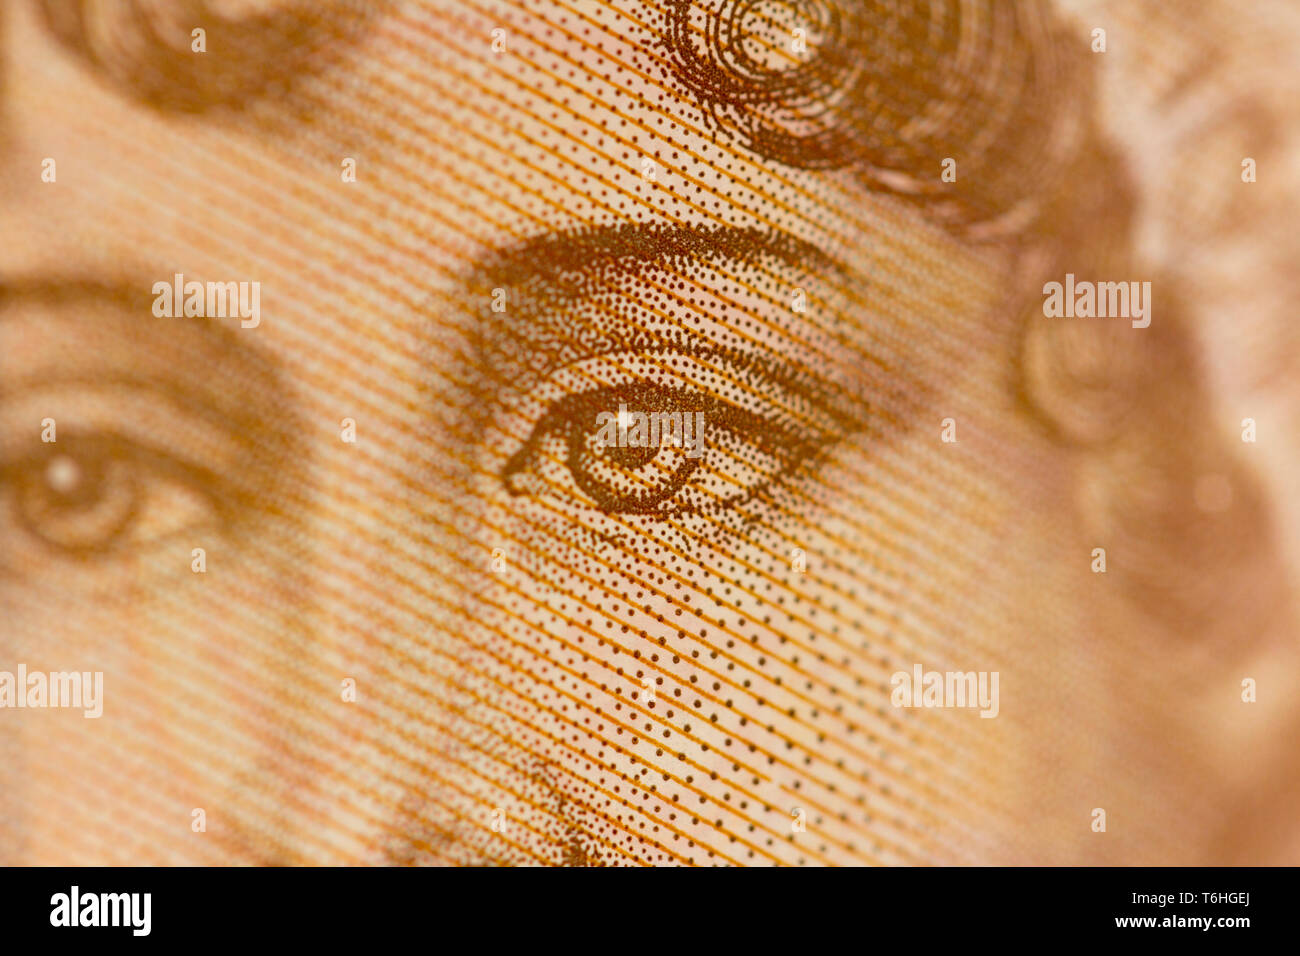 Close-up, macro photo of a piece of £10. Print, portrait, eyes of Jane Austen. Ten pounds sterling. Stock Photo